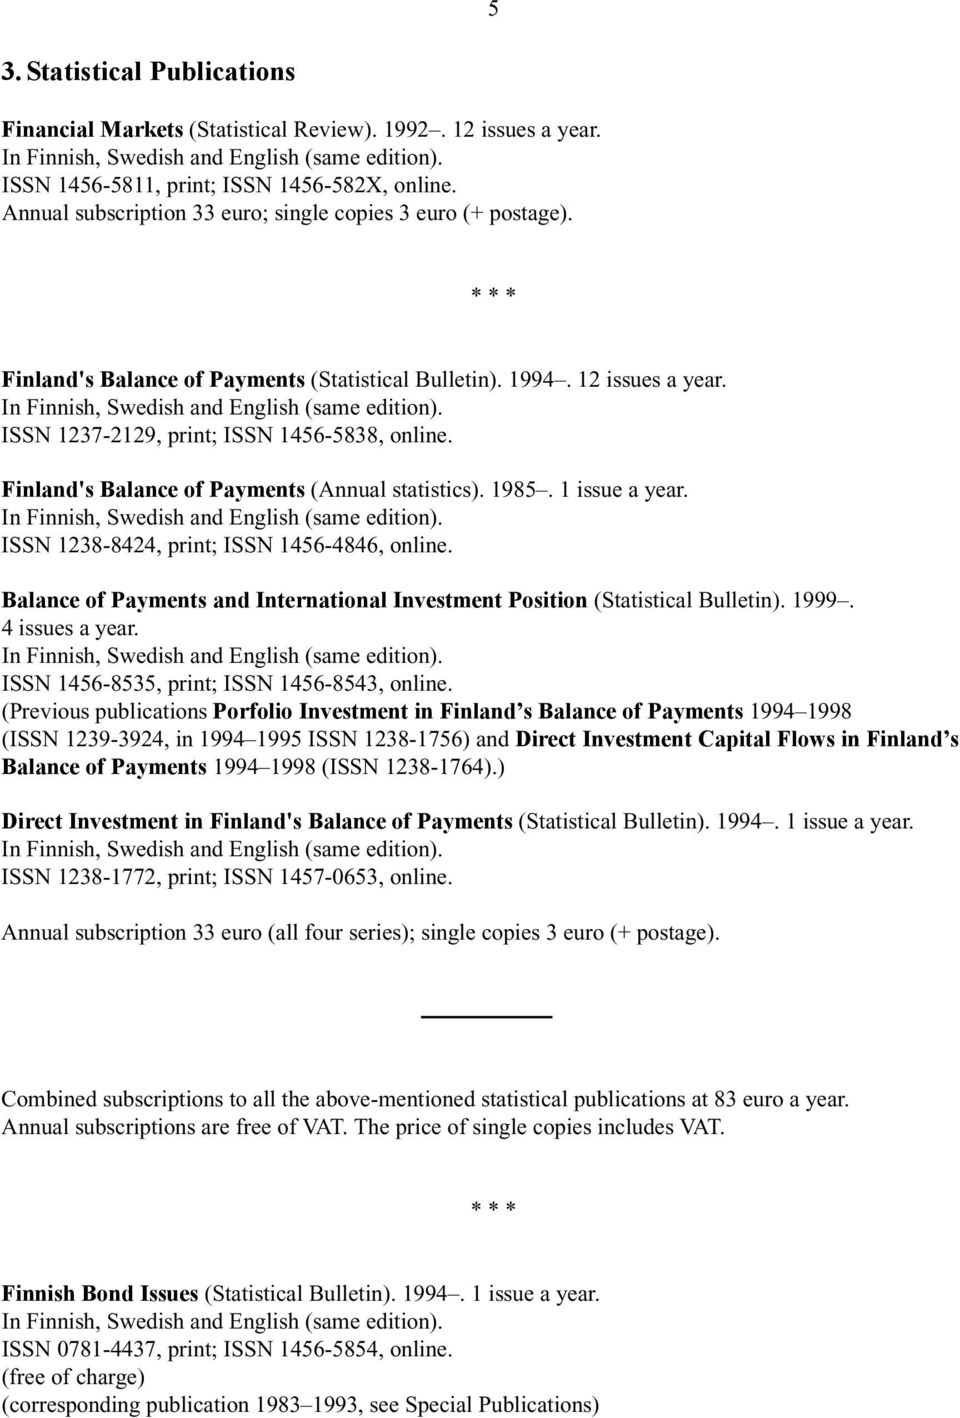 ISSN 1237-2129, print; ISSN 1456-5838, online. Finland's Balance of Payments (Annual statistics). 1985. 1 issue a year. In Finnish, Swedish and English (same edition).